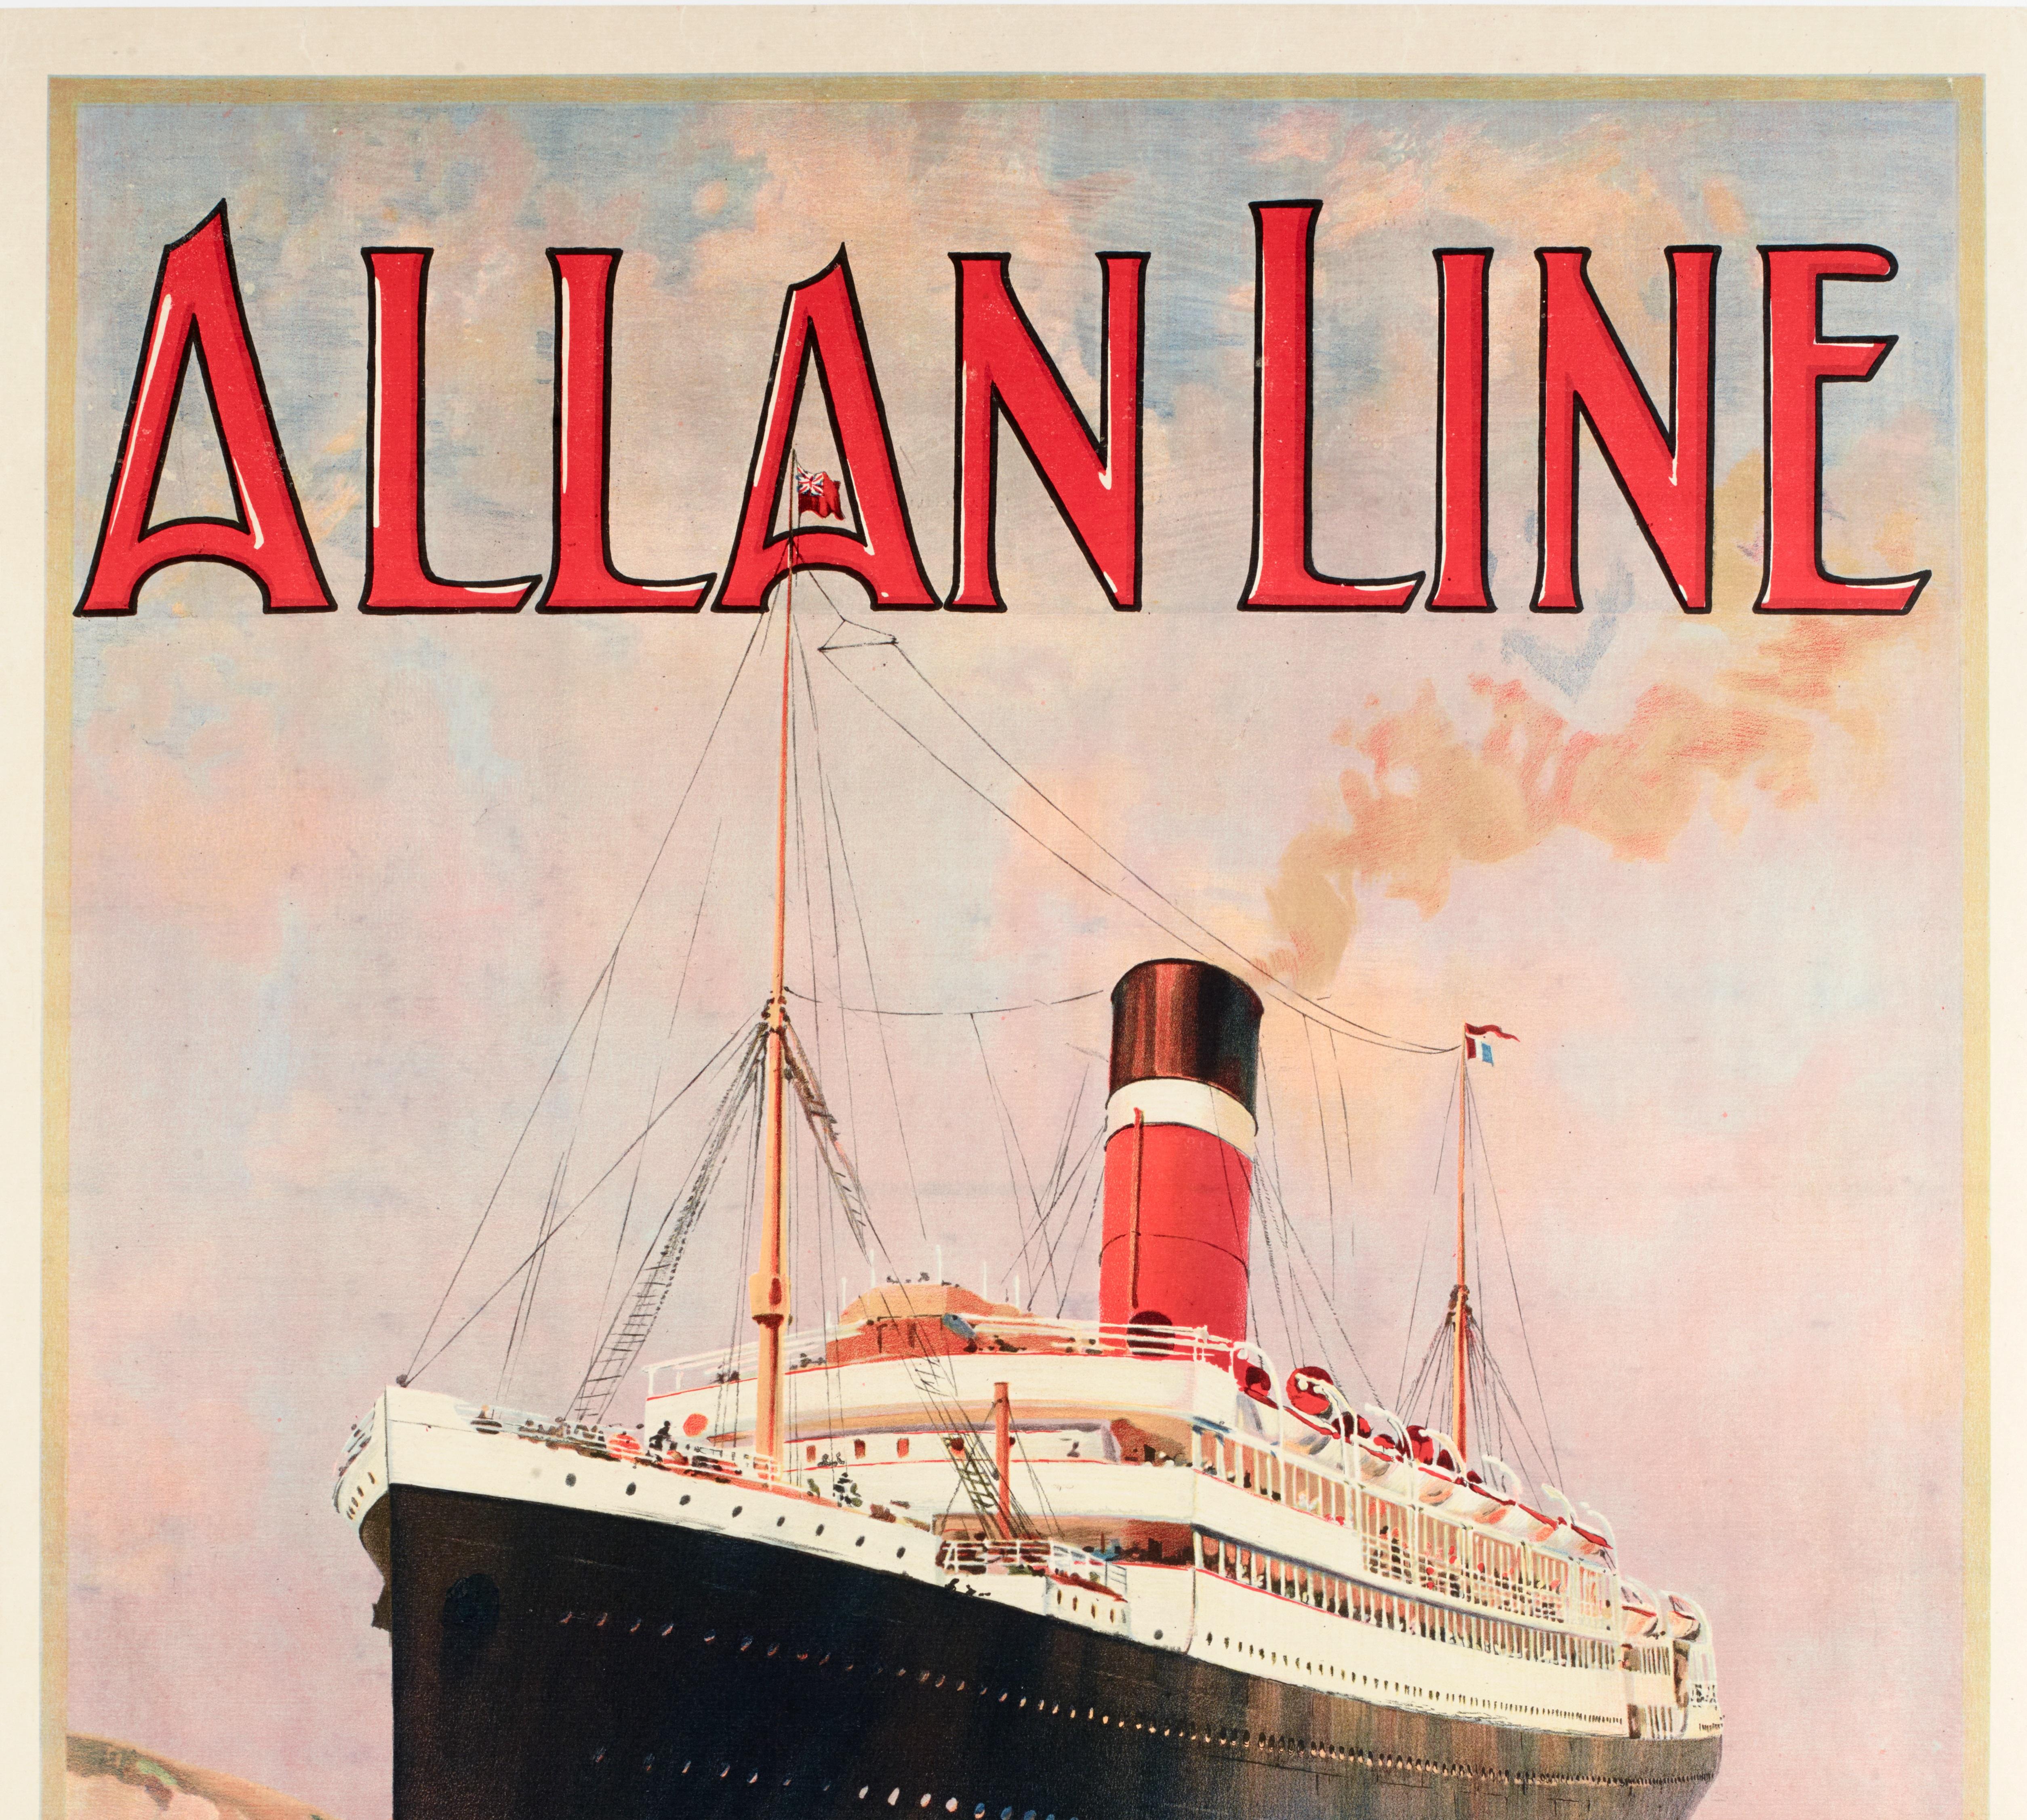 Original Vintage boating poster for the Allan Line in 1900 by Rosenvinge.

Artist: Odin Rosenvinge
Title: Allan Line - London & Plymouth to Quebec & Montreal
Date: circa 1900-1910
Size (w x h): 24.8 x 39.9 in / 63 x 101.4 cm
Printer: Turner &